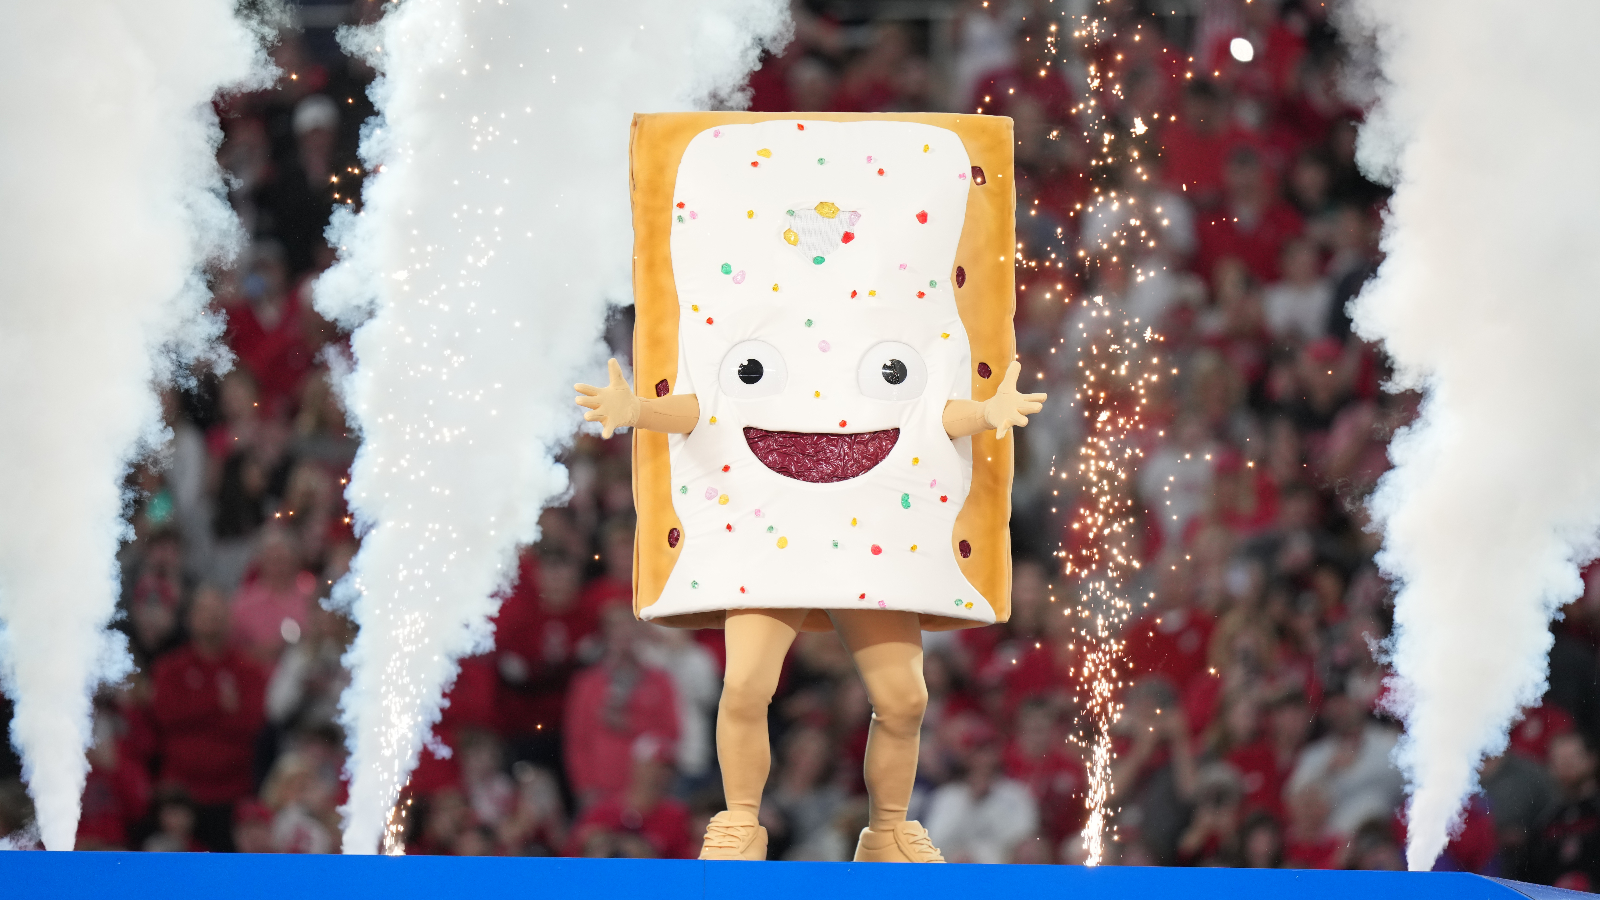 The Pop Tarts Bowl Pulled A Bait And Switch On Its Edible Mascot